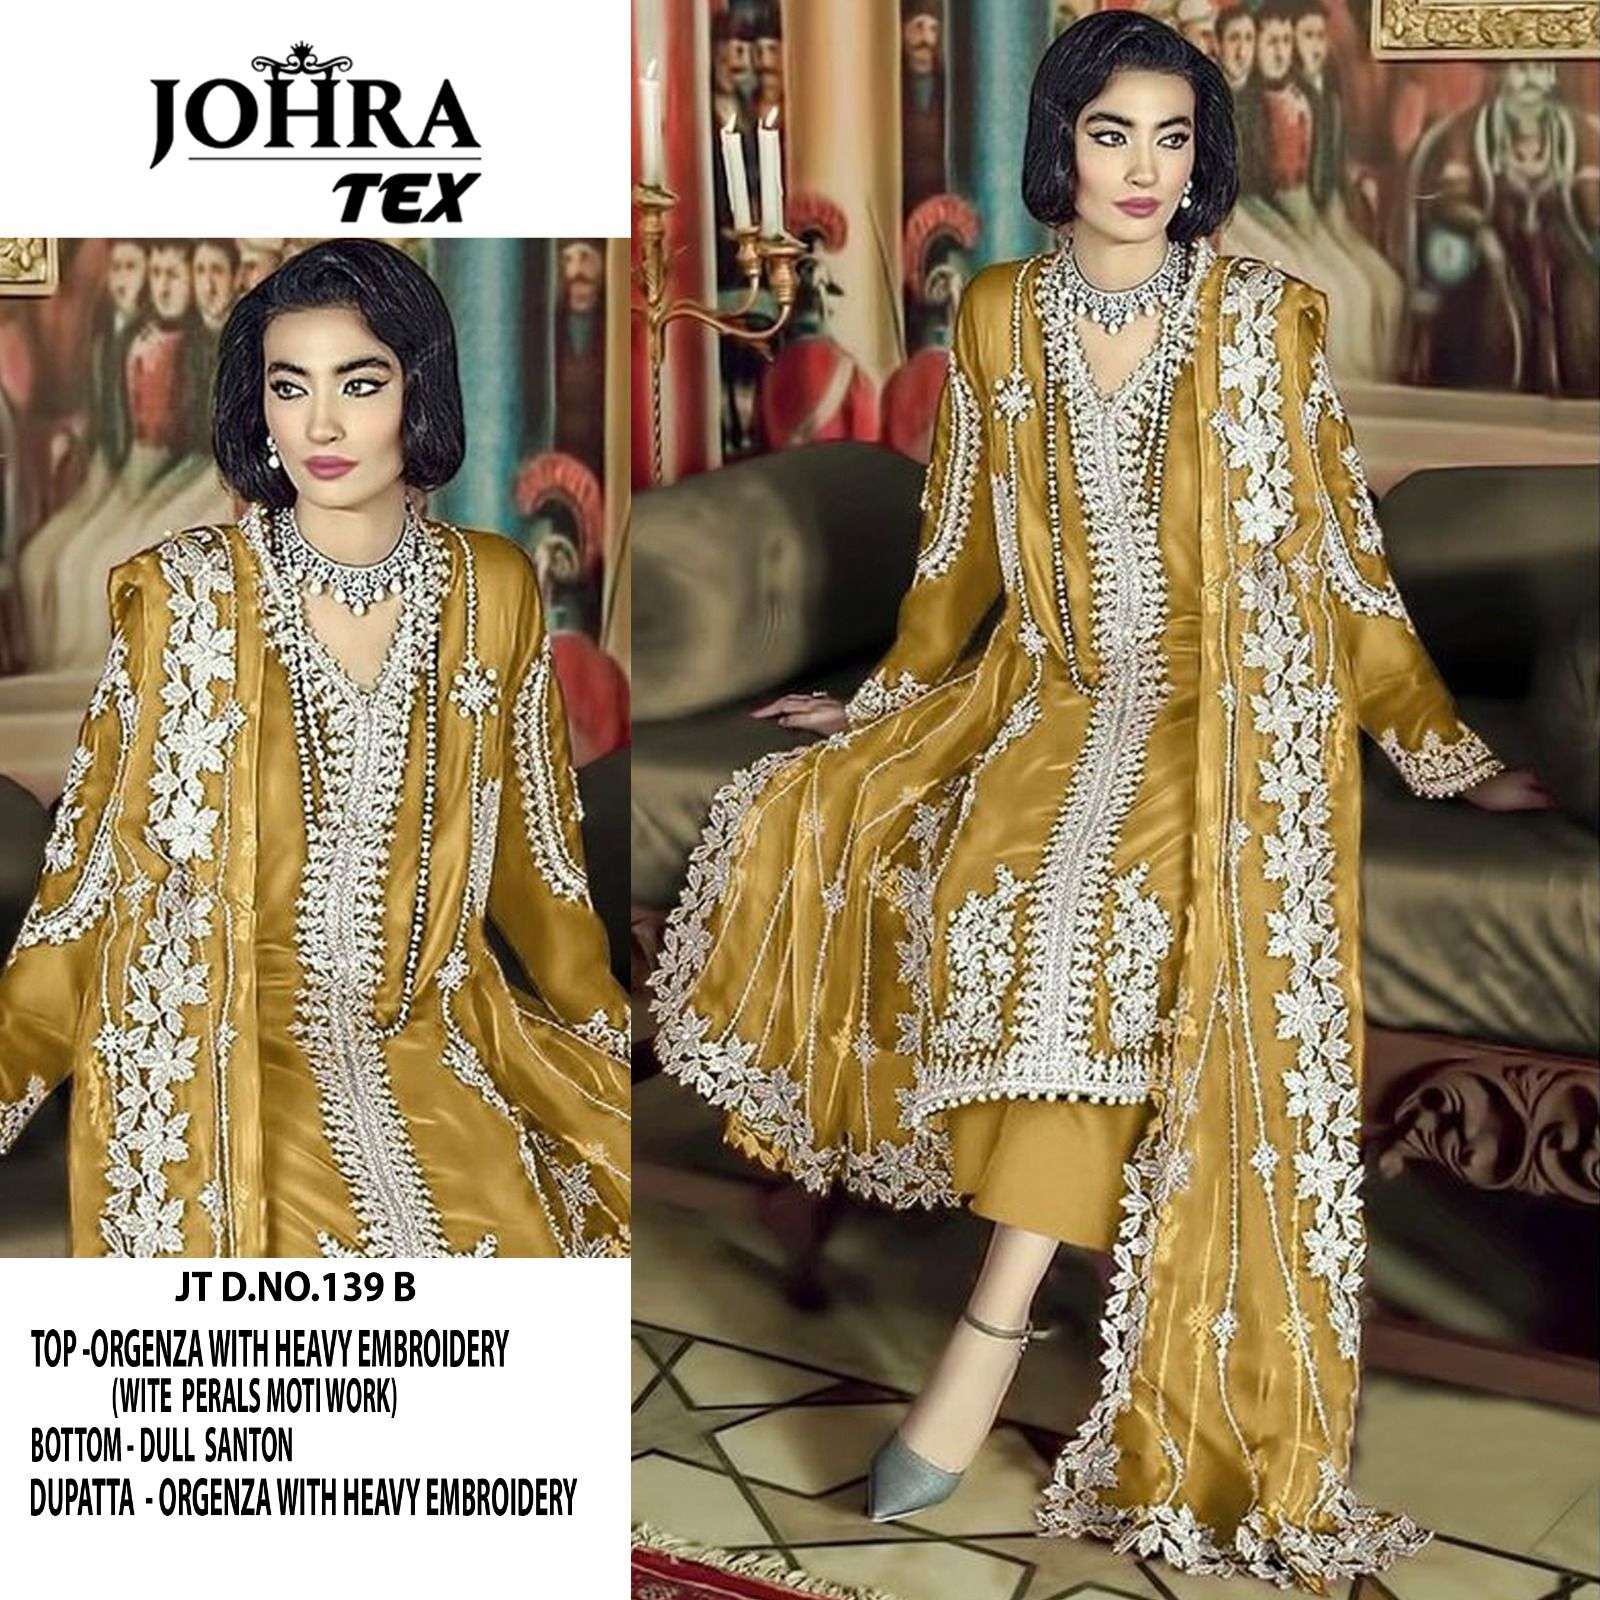 JOHRA TEX 139 ORGANZA WITH EMBROIDERY WORK PAKISTANI SUITS C...